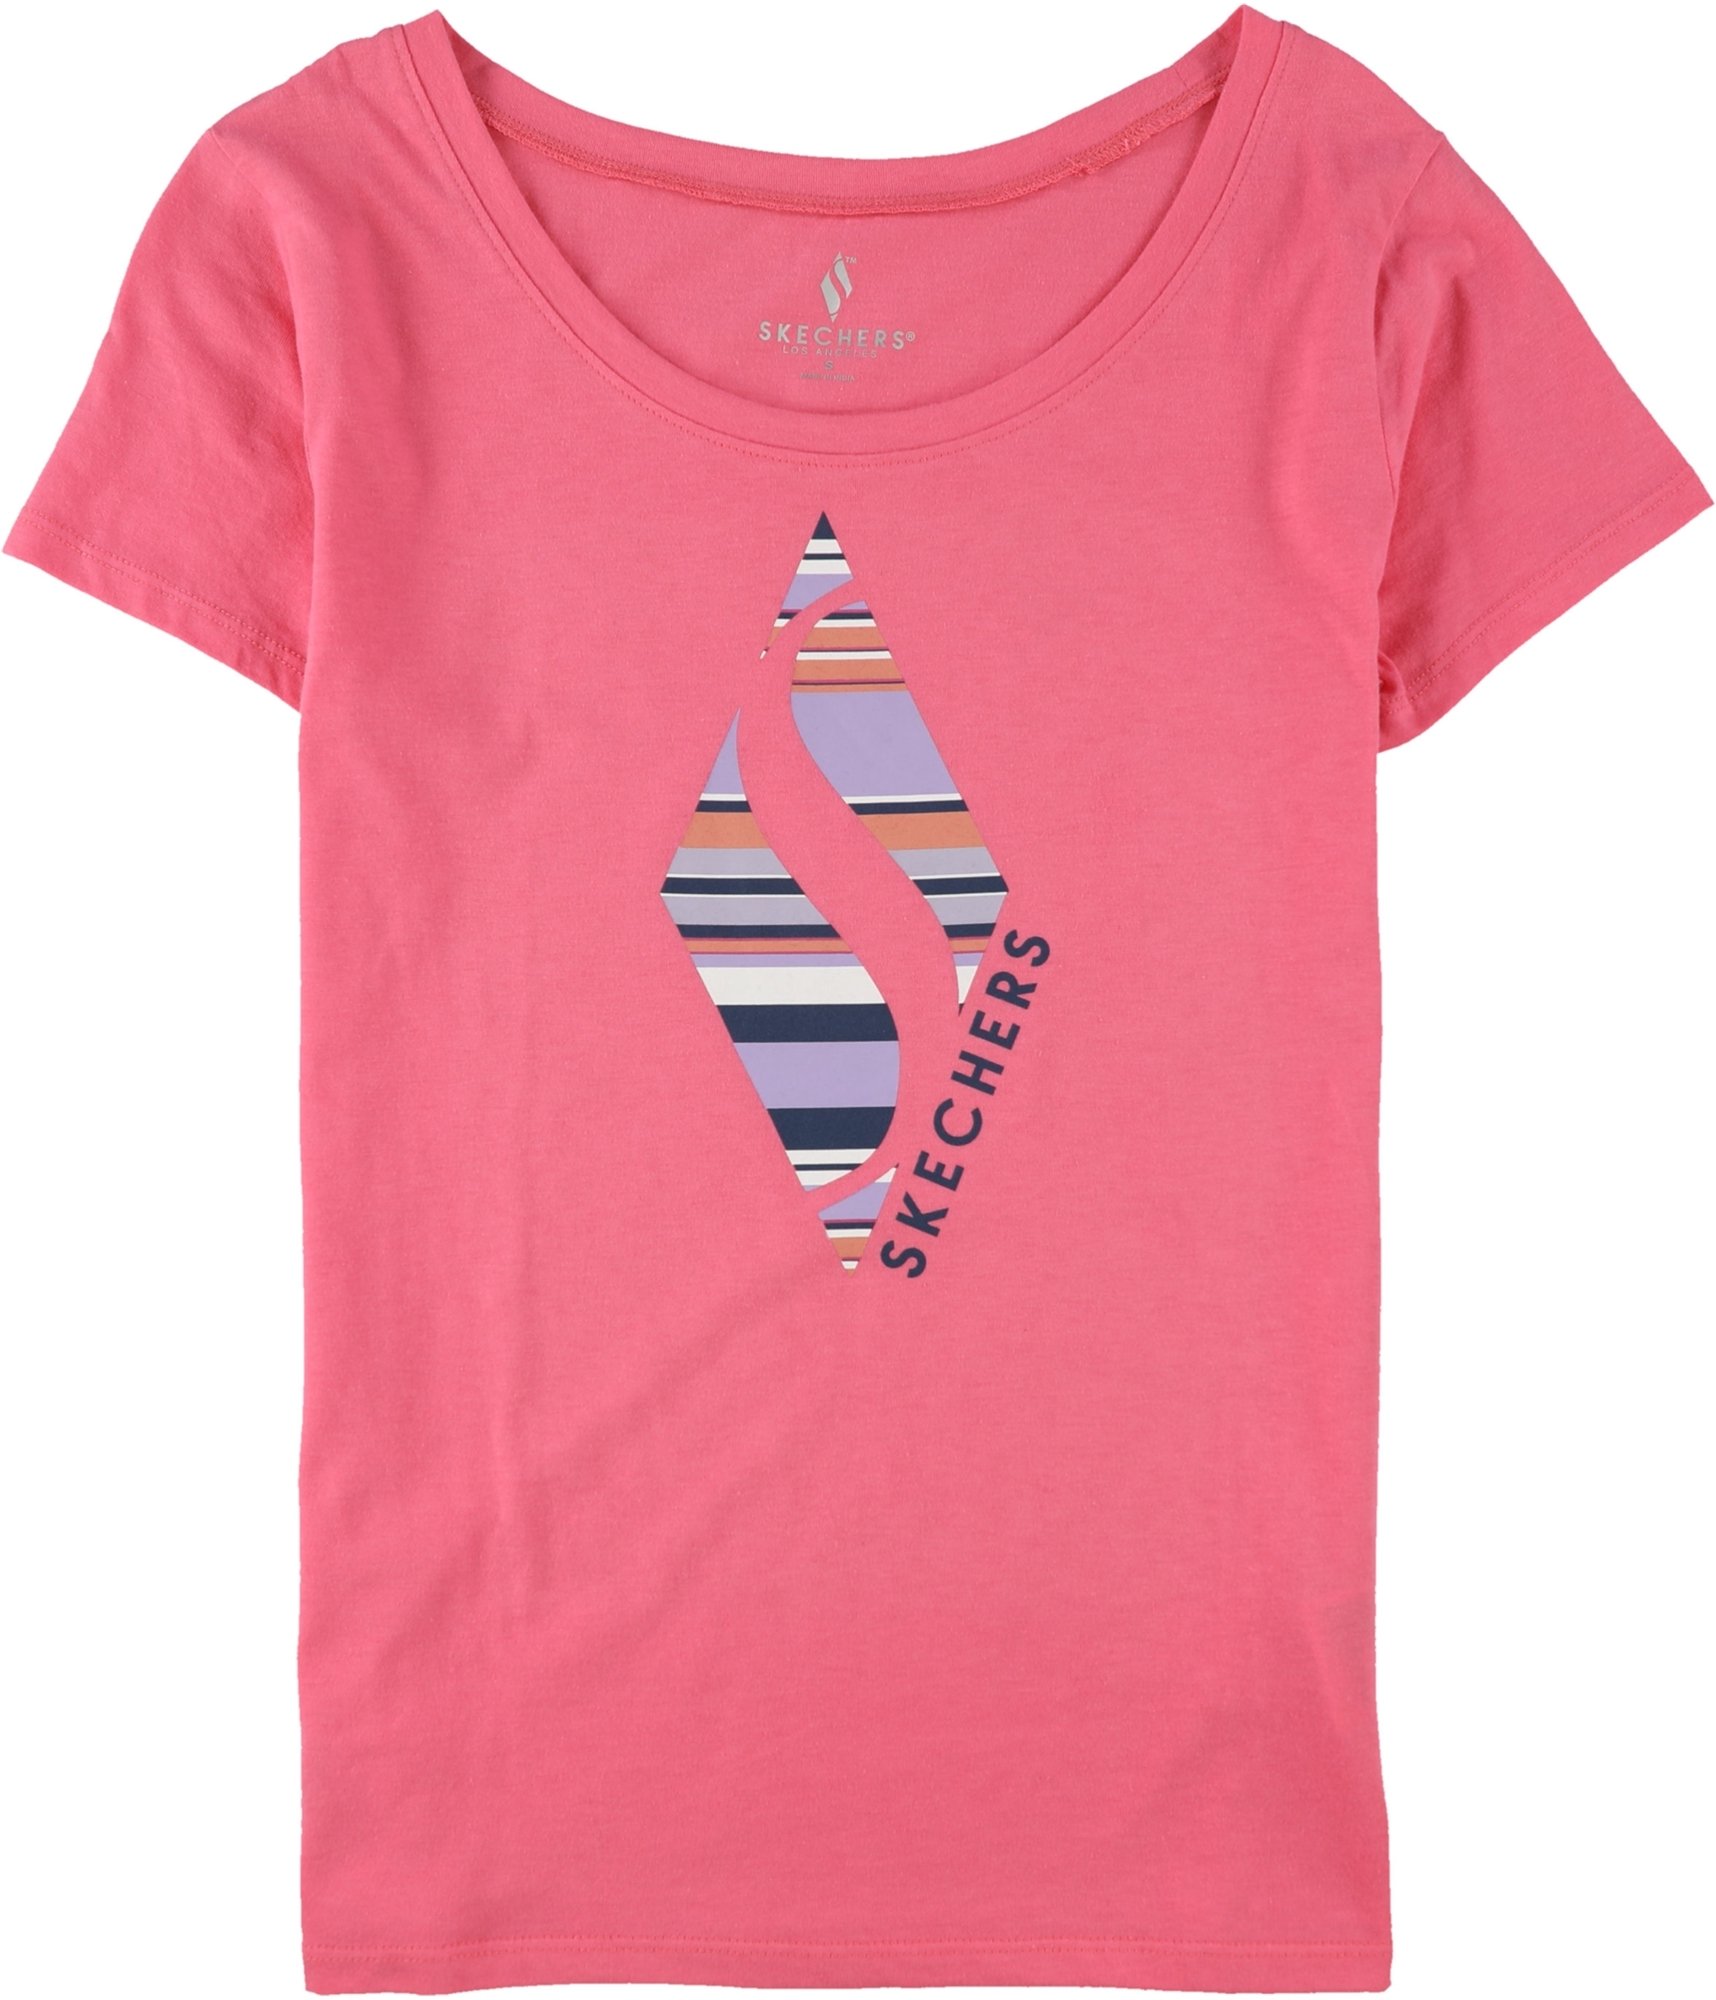 Skechers a T-Shirt Buy Striped Diamond Womens Graphic | Tagsweekly